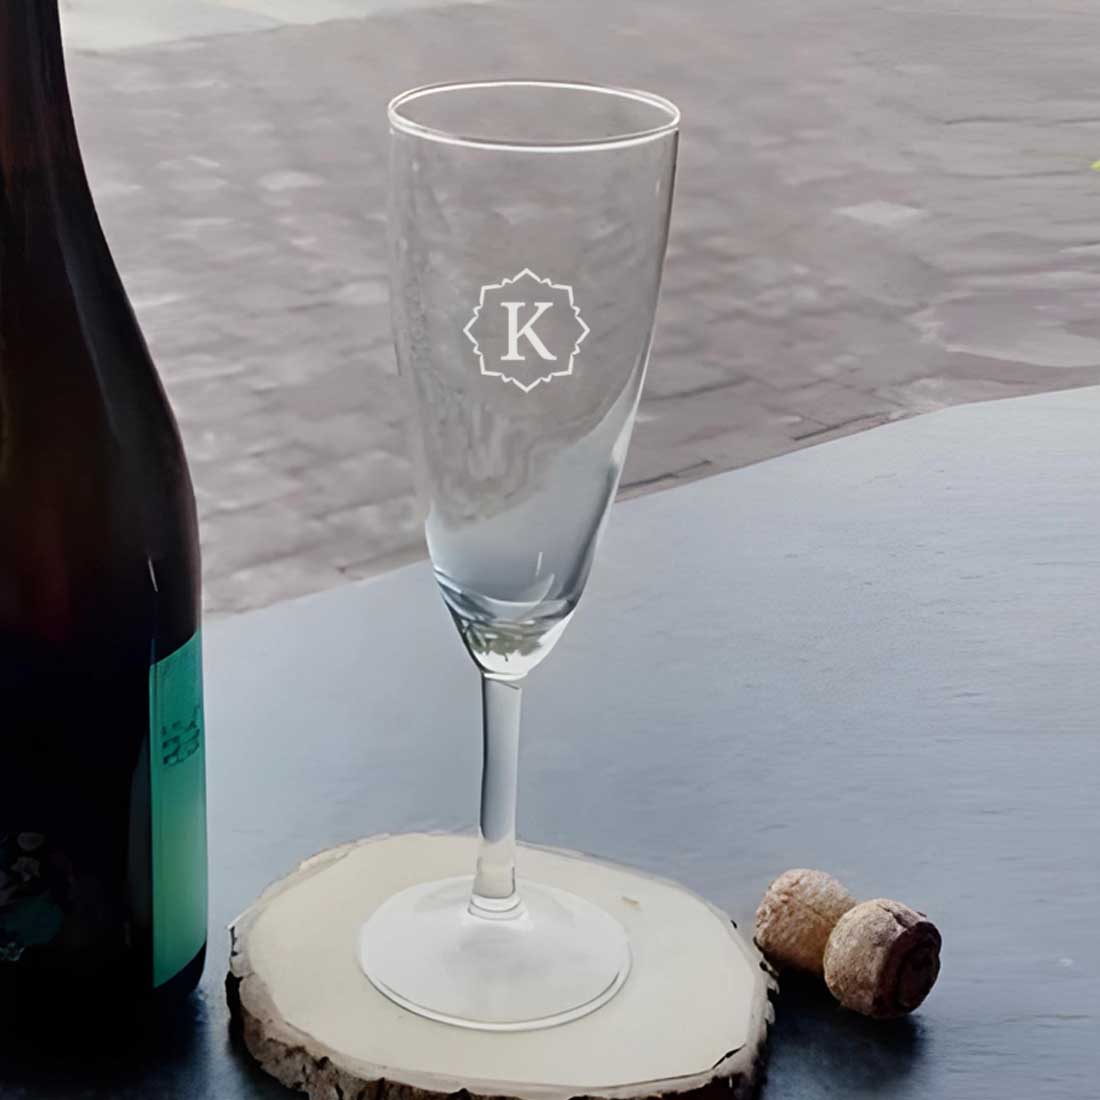 Champagne Glasses with Name - Personalized Engraved Flute Glasses